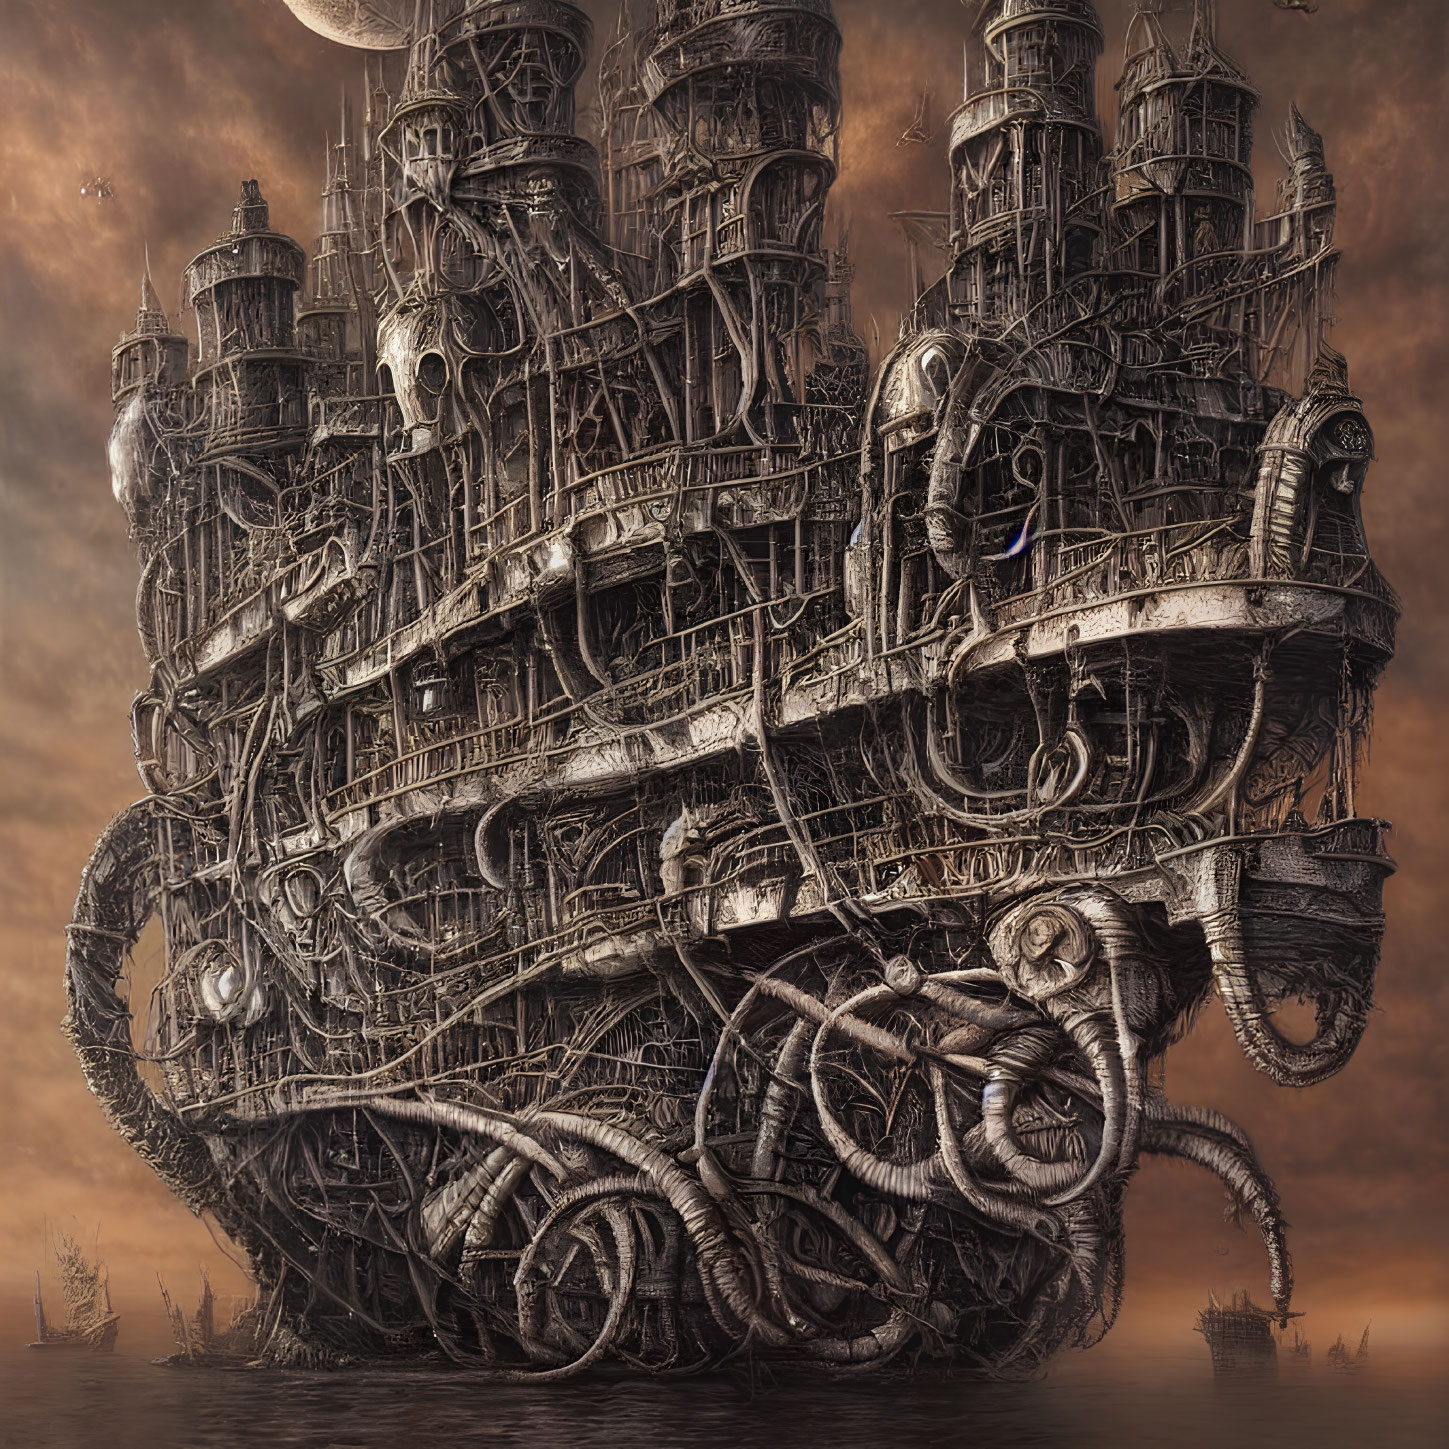 Fantastical ship with numerous sails and tentacles against dusky sky